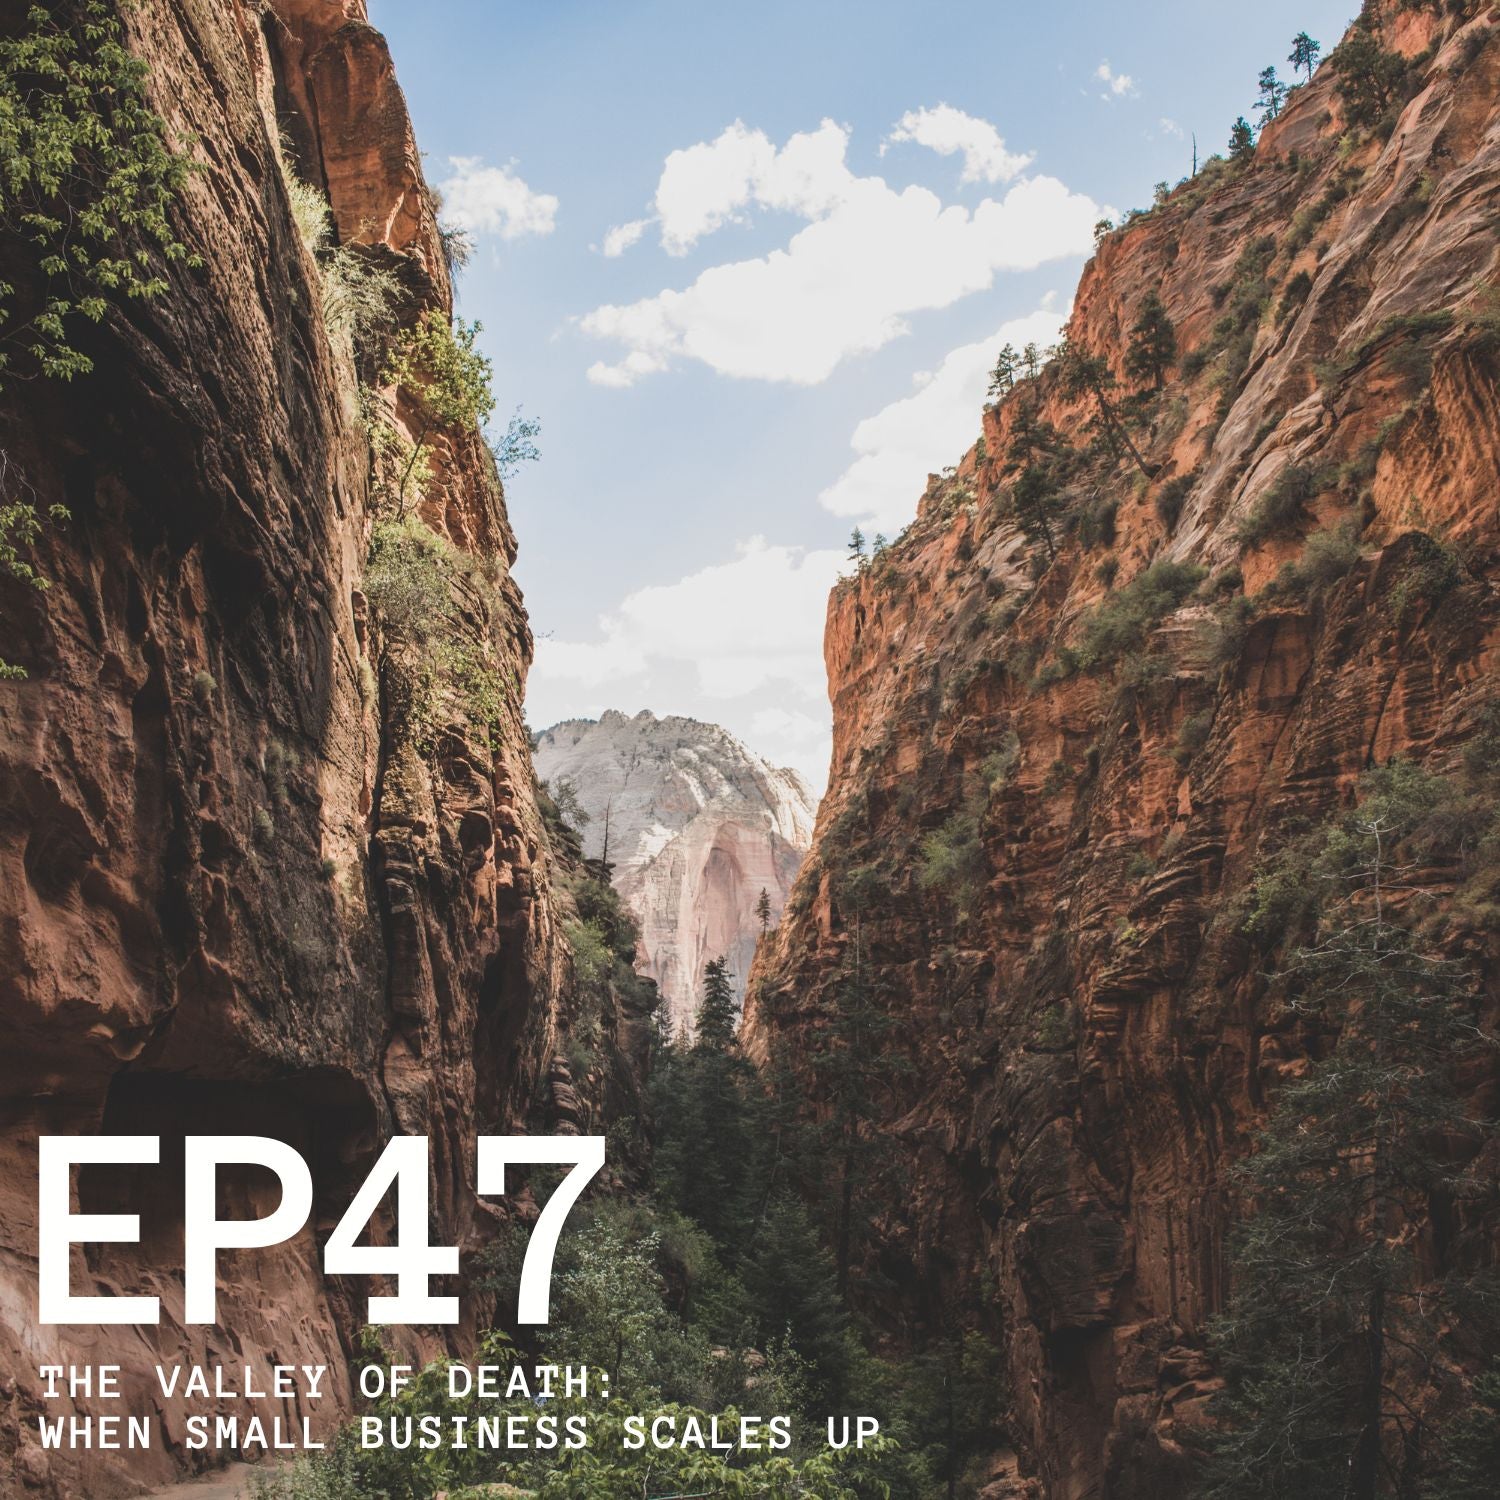 Episode 47 - The Valley of Death: When Small Business Scales Up